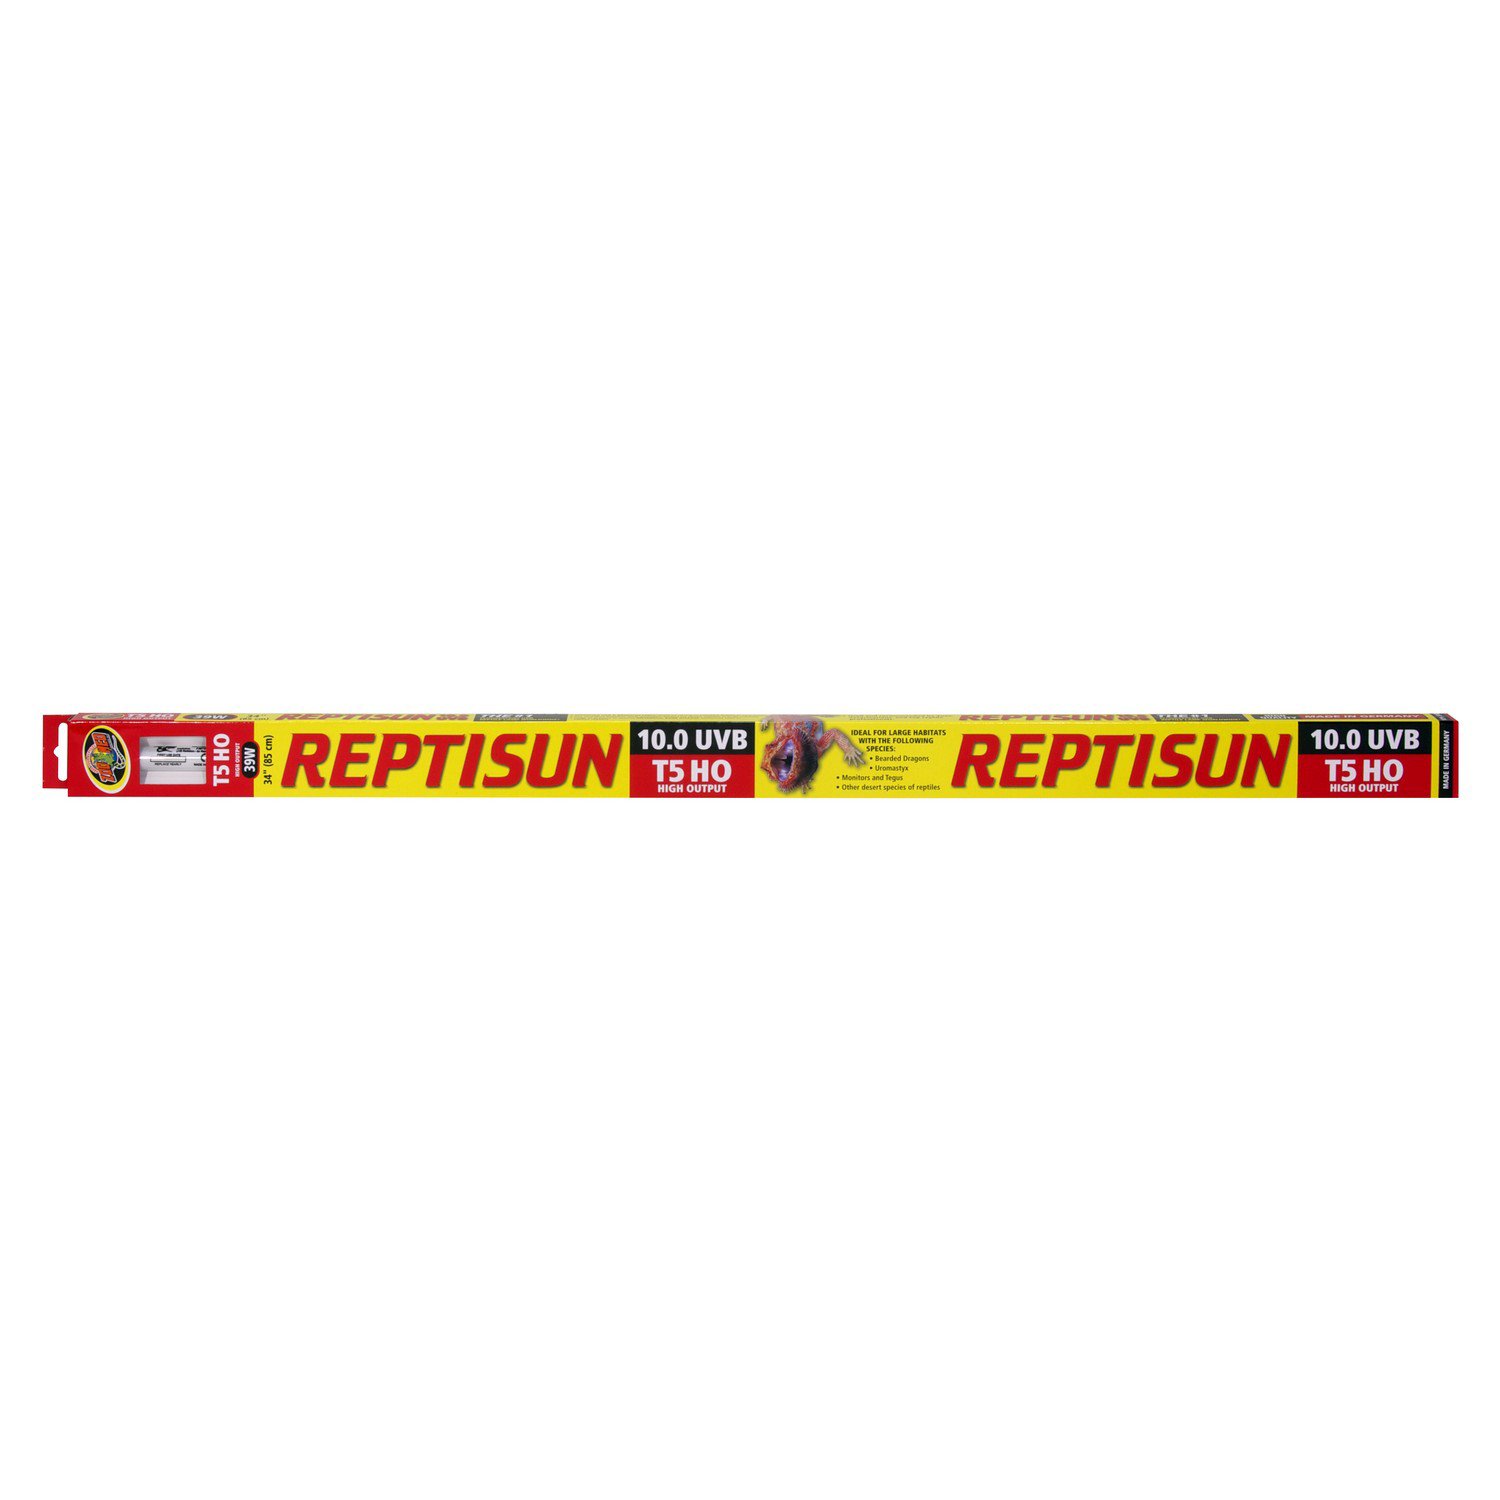 Zoo Med T8 ReptiSun 10.0 UVB Fluorescent Bulbs in 4 sizes